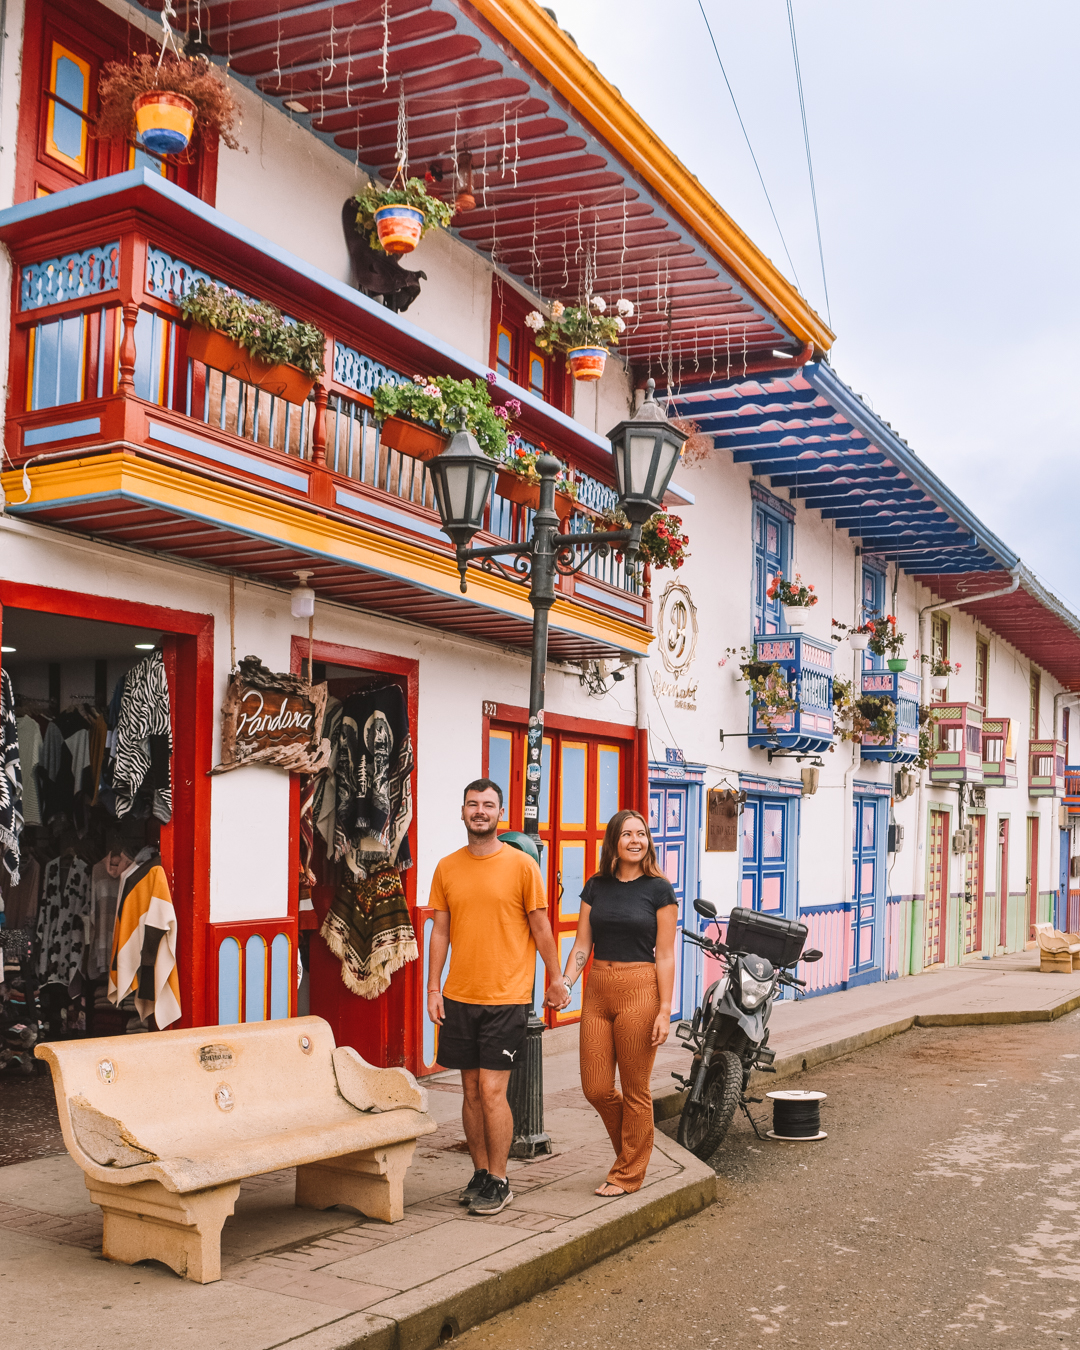 Visit Colombia, the town of Salento, travelling to Colombia